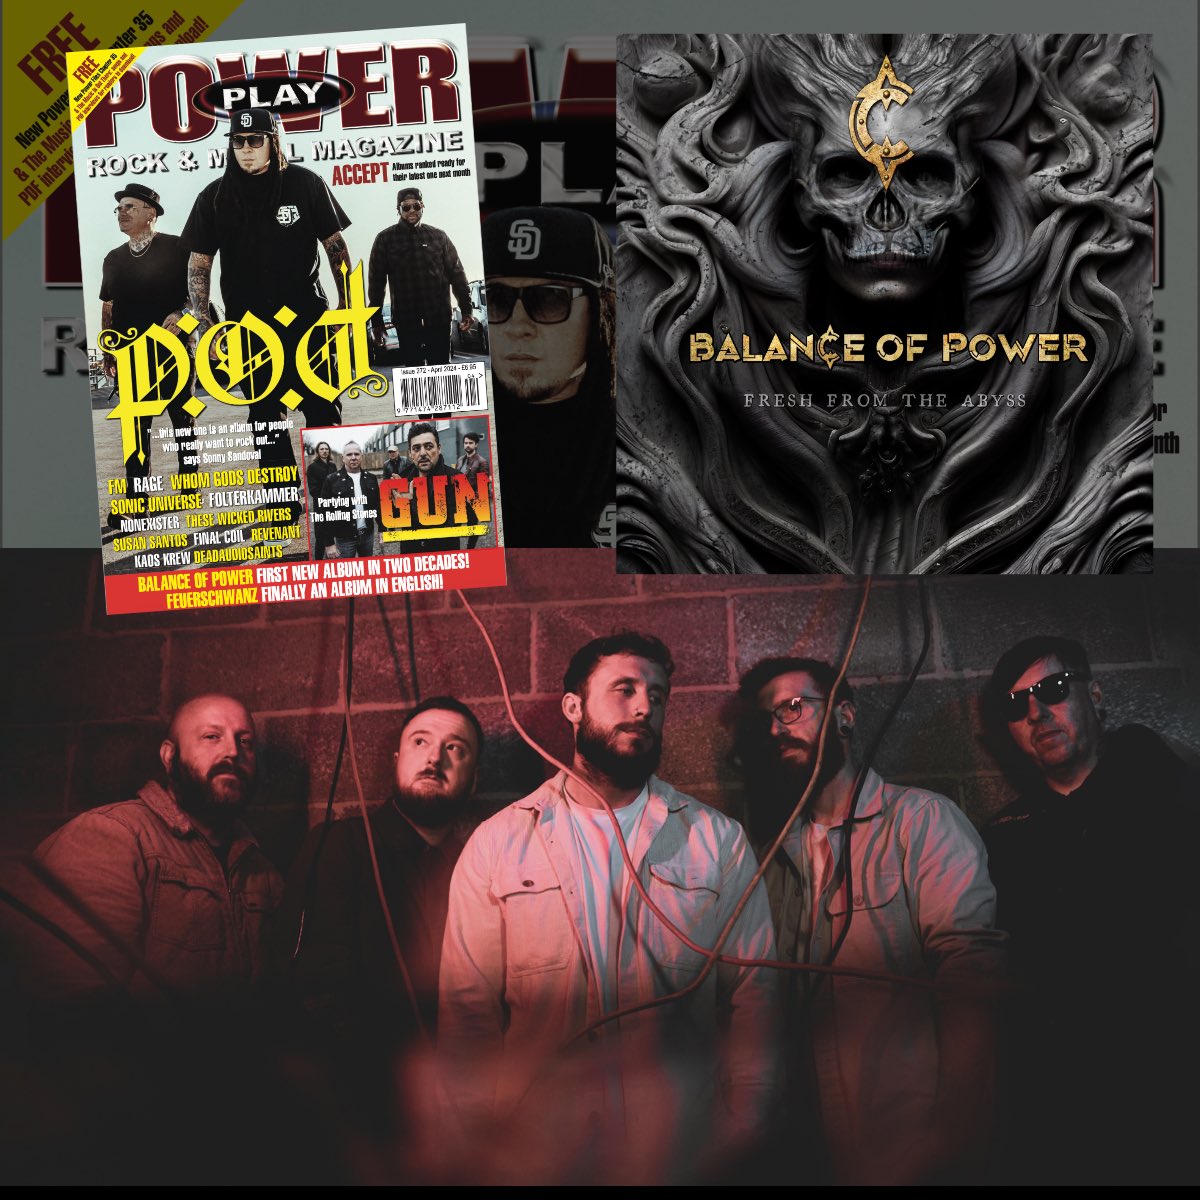 🔥 Coming in HOT! The new issue of Powerplay Magazine is out now, featuring Balance Of Power and Edit The Tide! 👌 @BalanceOfPowerA @EditTheTideBand @Powerplaymag #StampedePRMusic #StampedePress #Rockbands #MusicPR #MusicMarketing #POD #metal